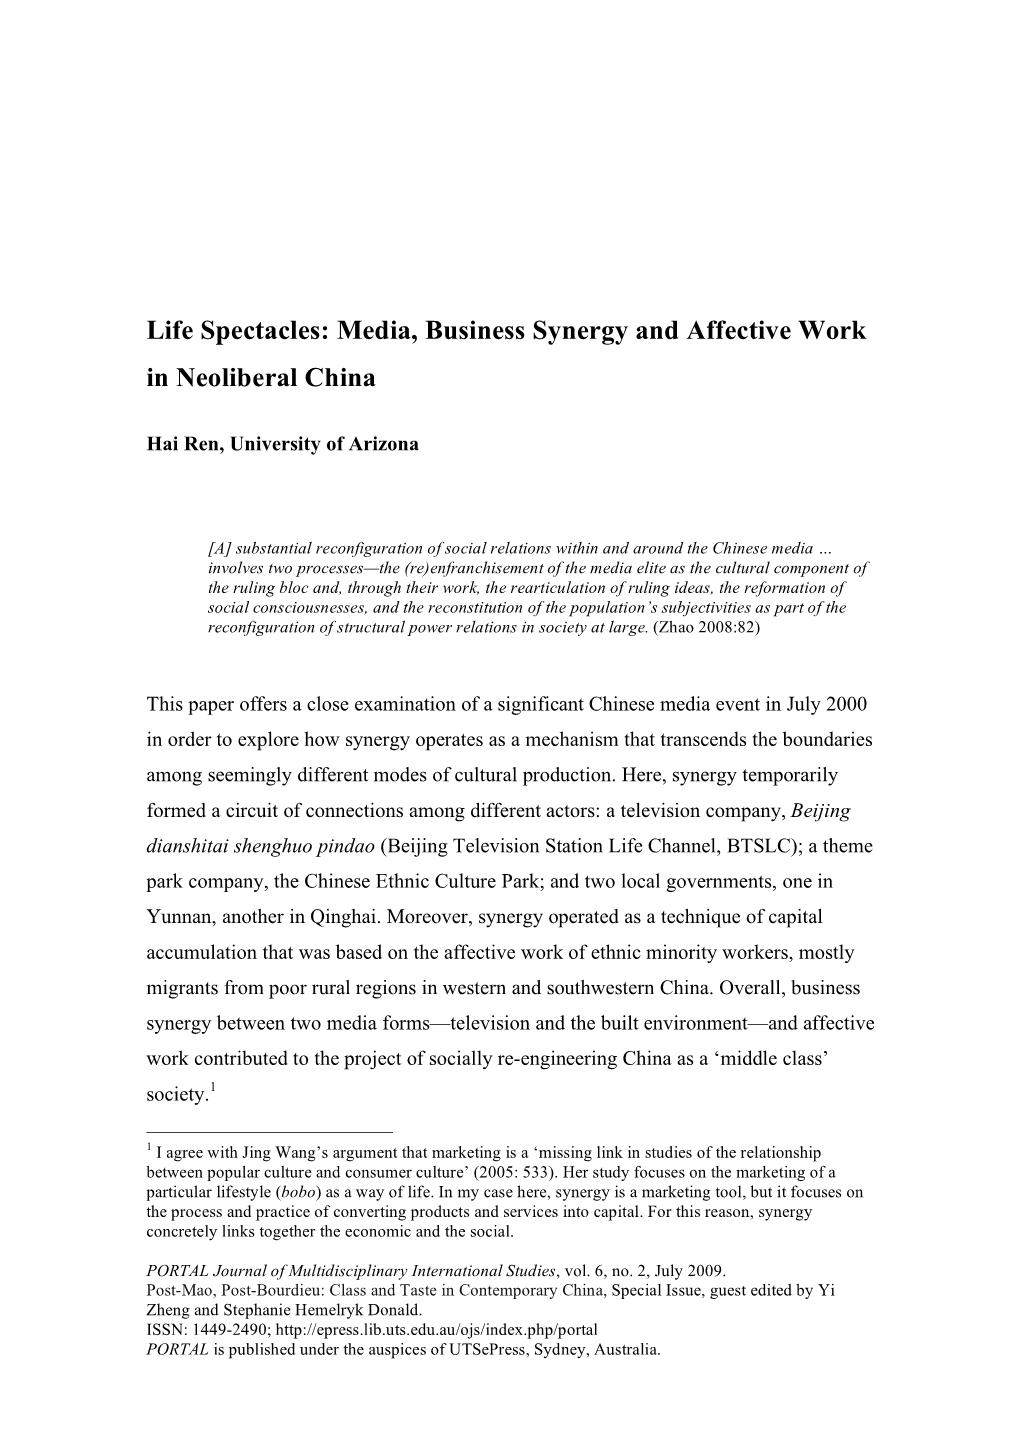 Life Spectacles: Media, Business Synergy and Affective Work in Neoliberal China